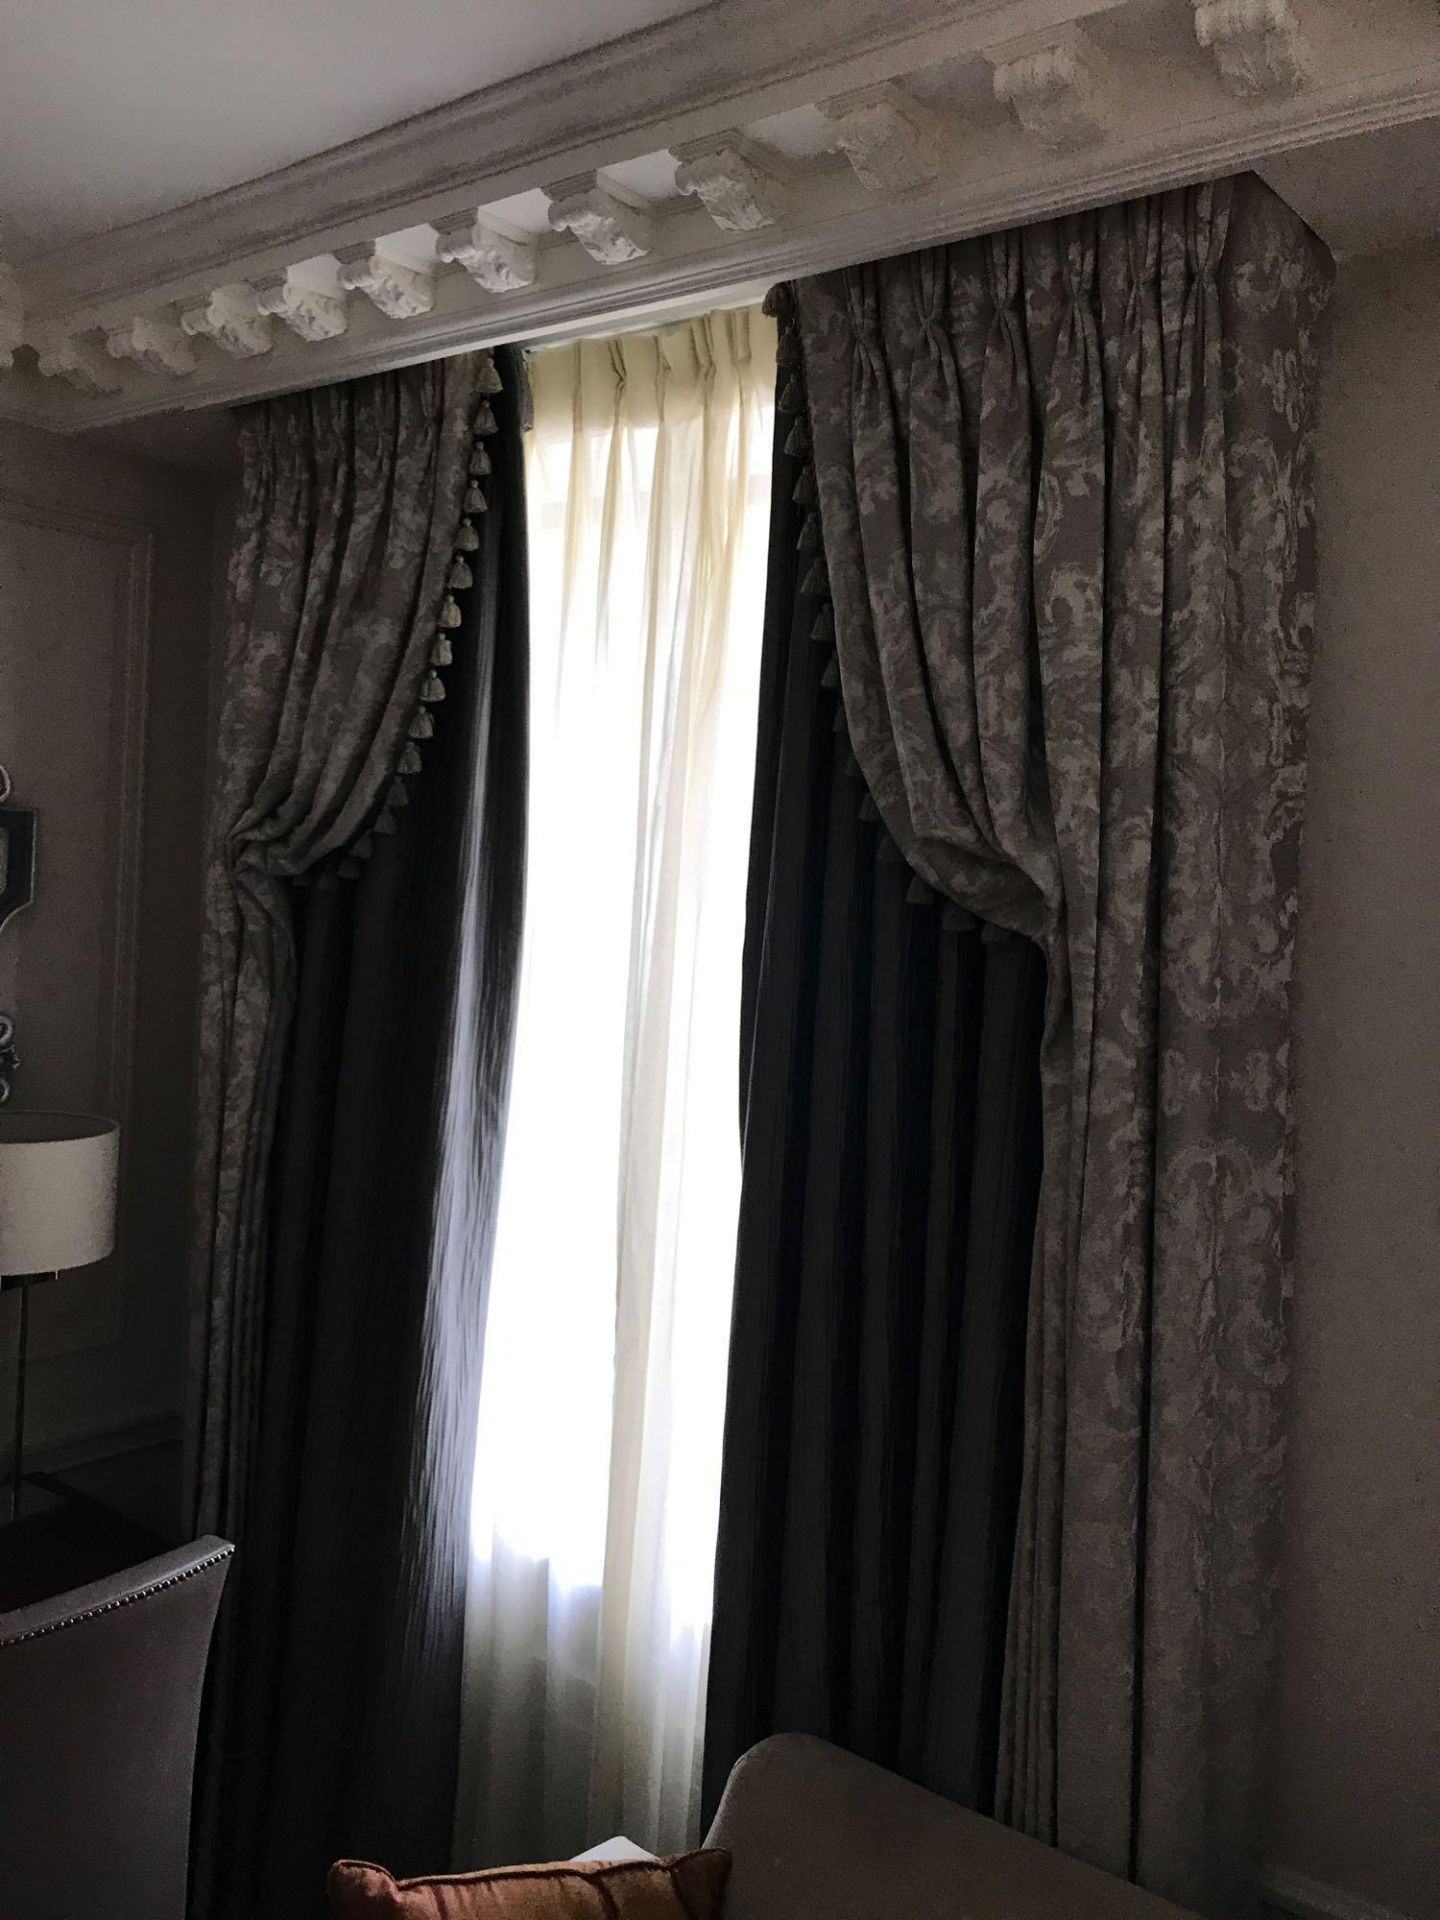 2 x Pair Of Gold And Silver Silk Drapes And Jabots With Tie Backs Span 255 x 190cm Room 624